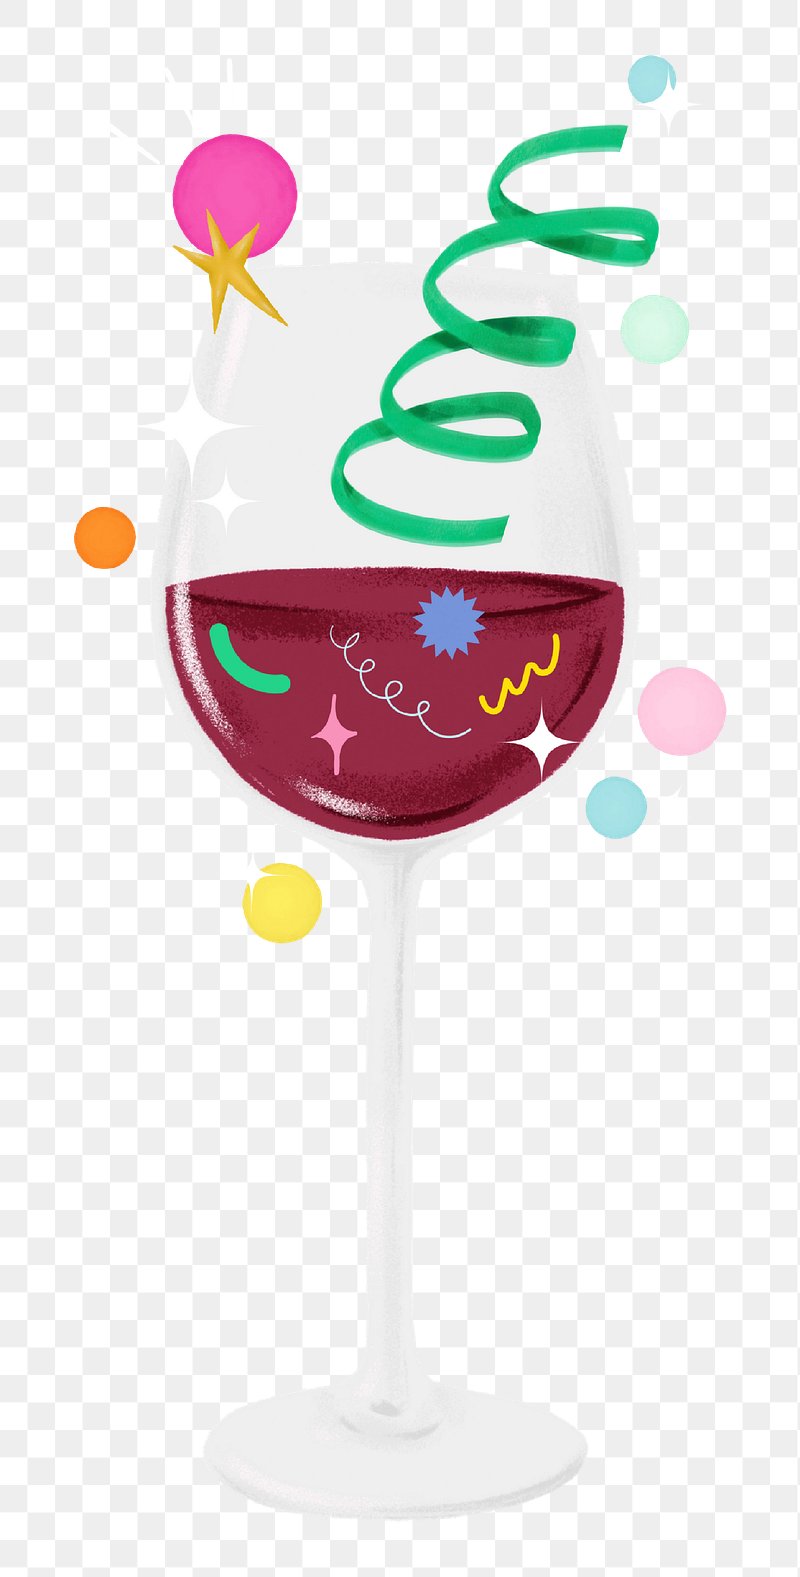 Wine Glass PNG Images | Free Photos, PNG Stickers, Wallpapers & Backgrounds  - rawpixel